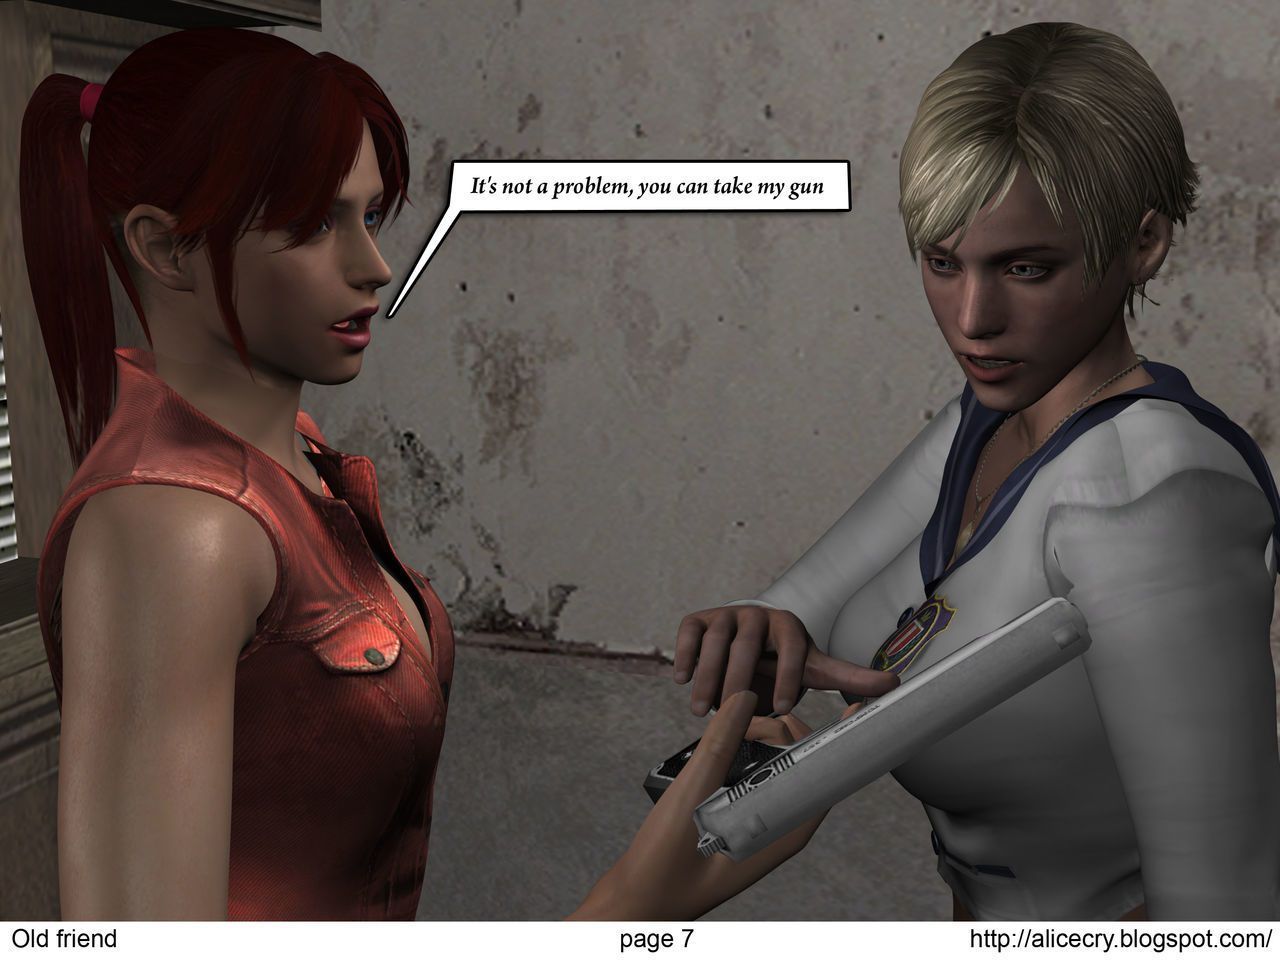 Resident evil: The old friend